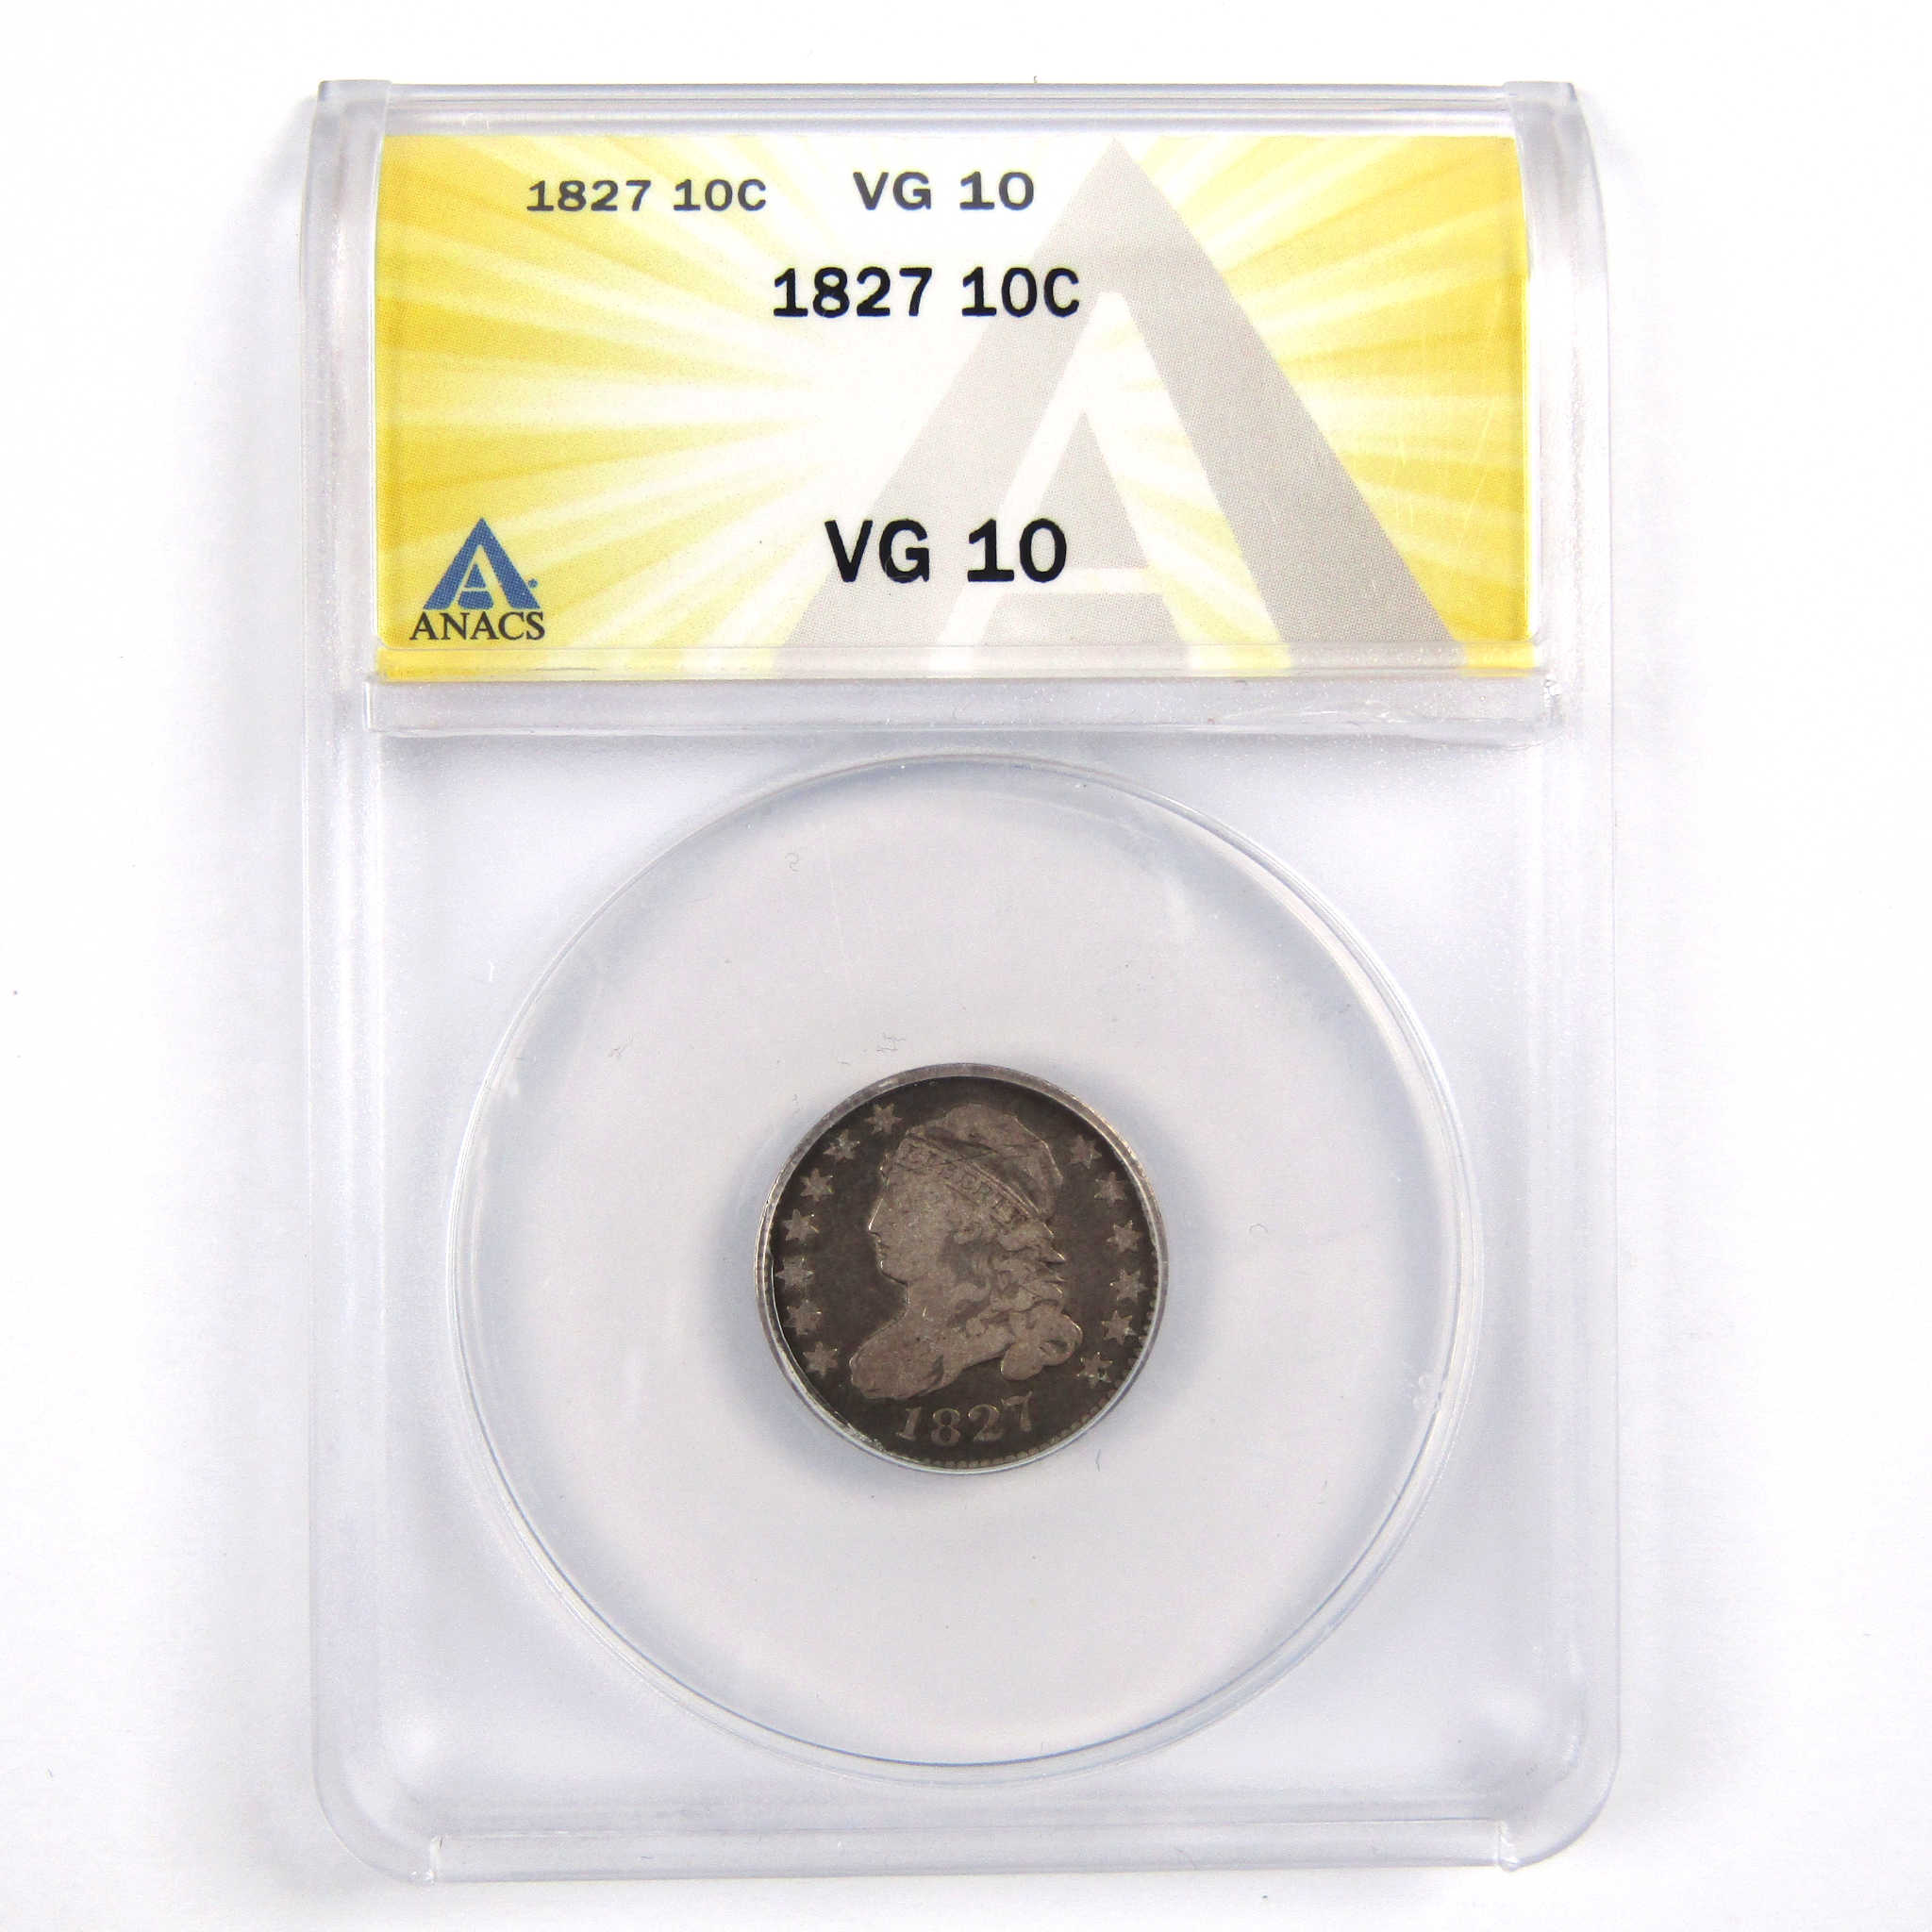 1827 Pointed Top Capped Bust 10c VG 10 ANACS 89.24% Silver SKU:I7934